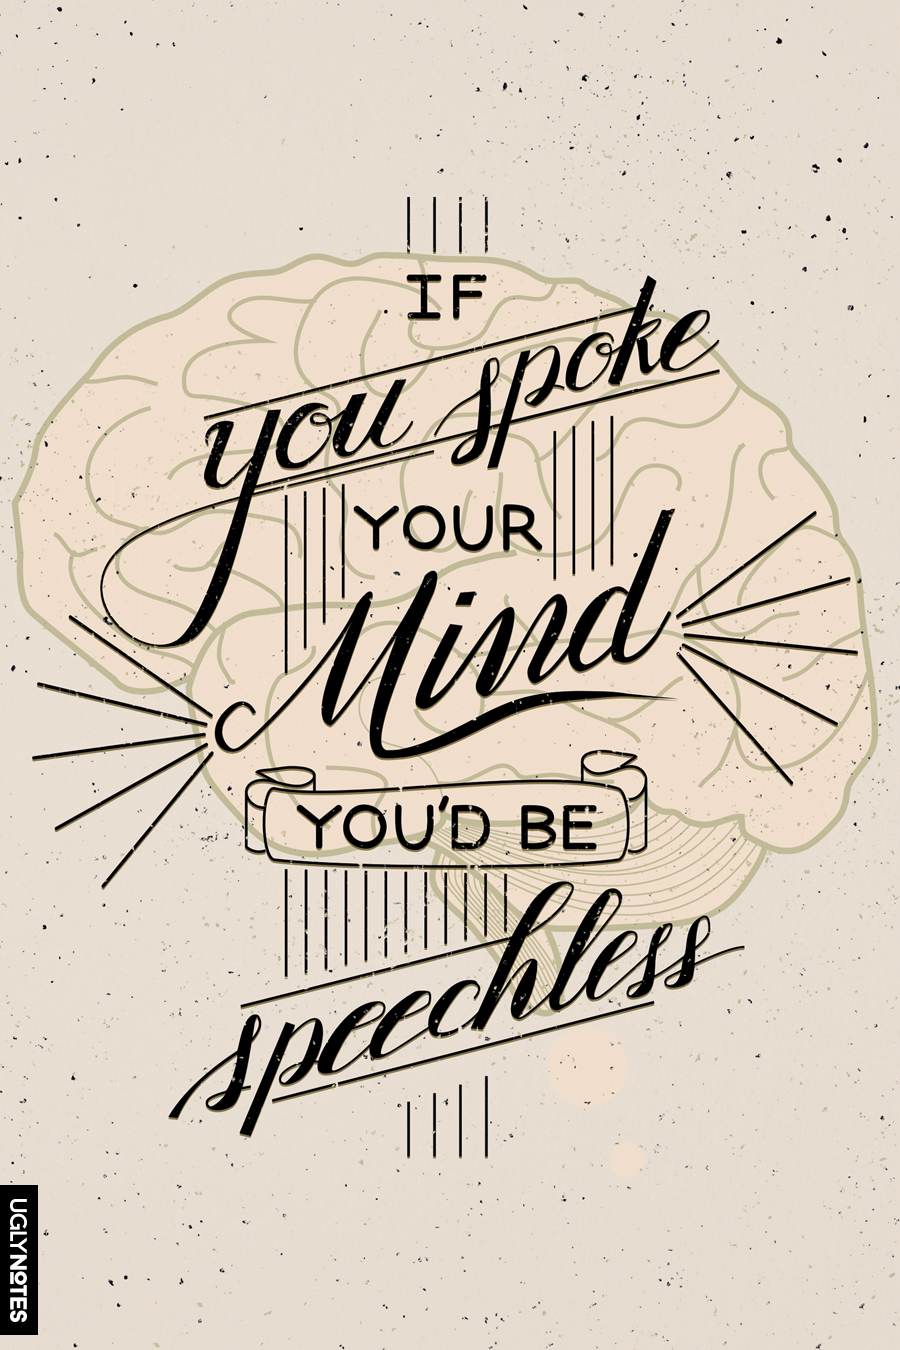 If you spoke your mind, you'd be speechless.